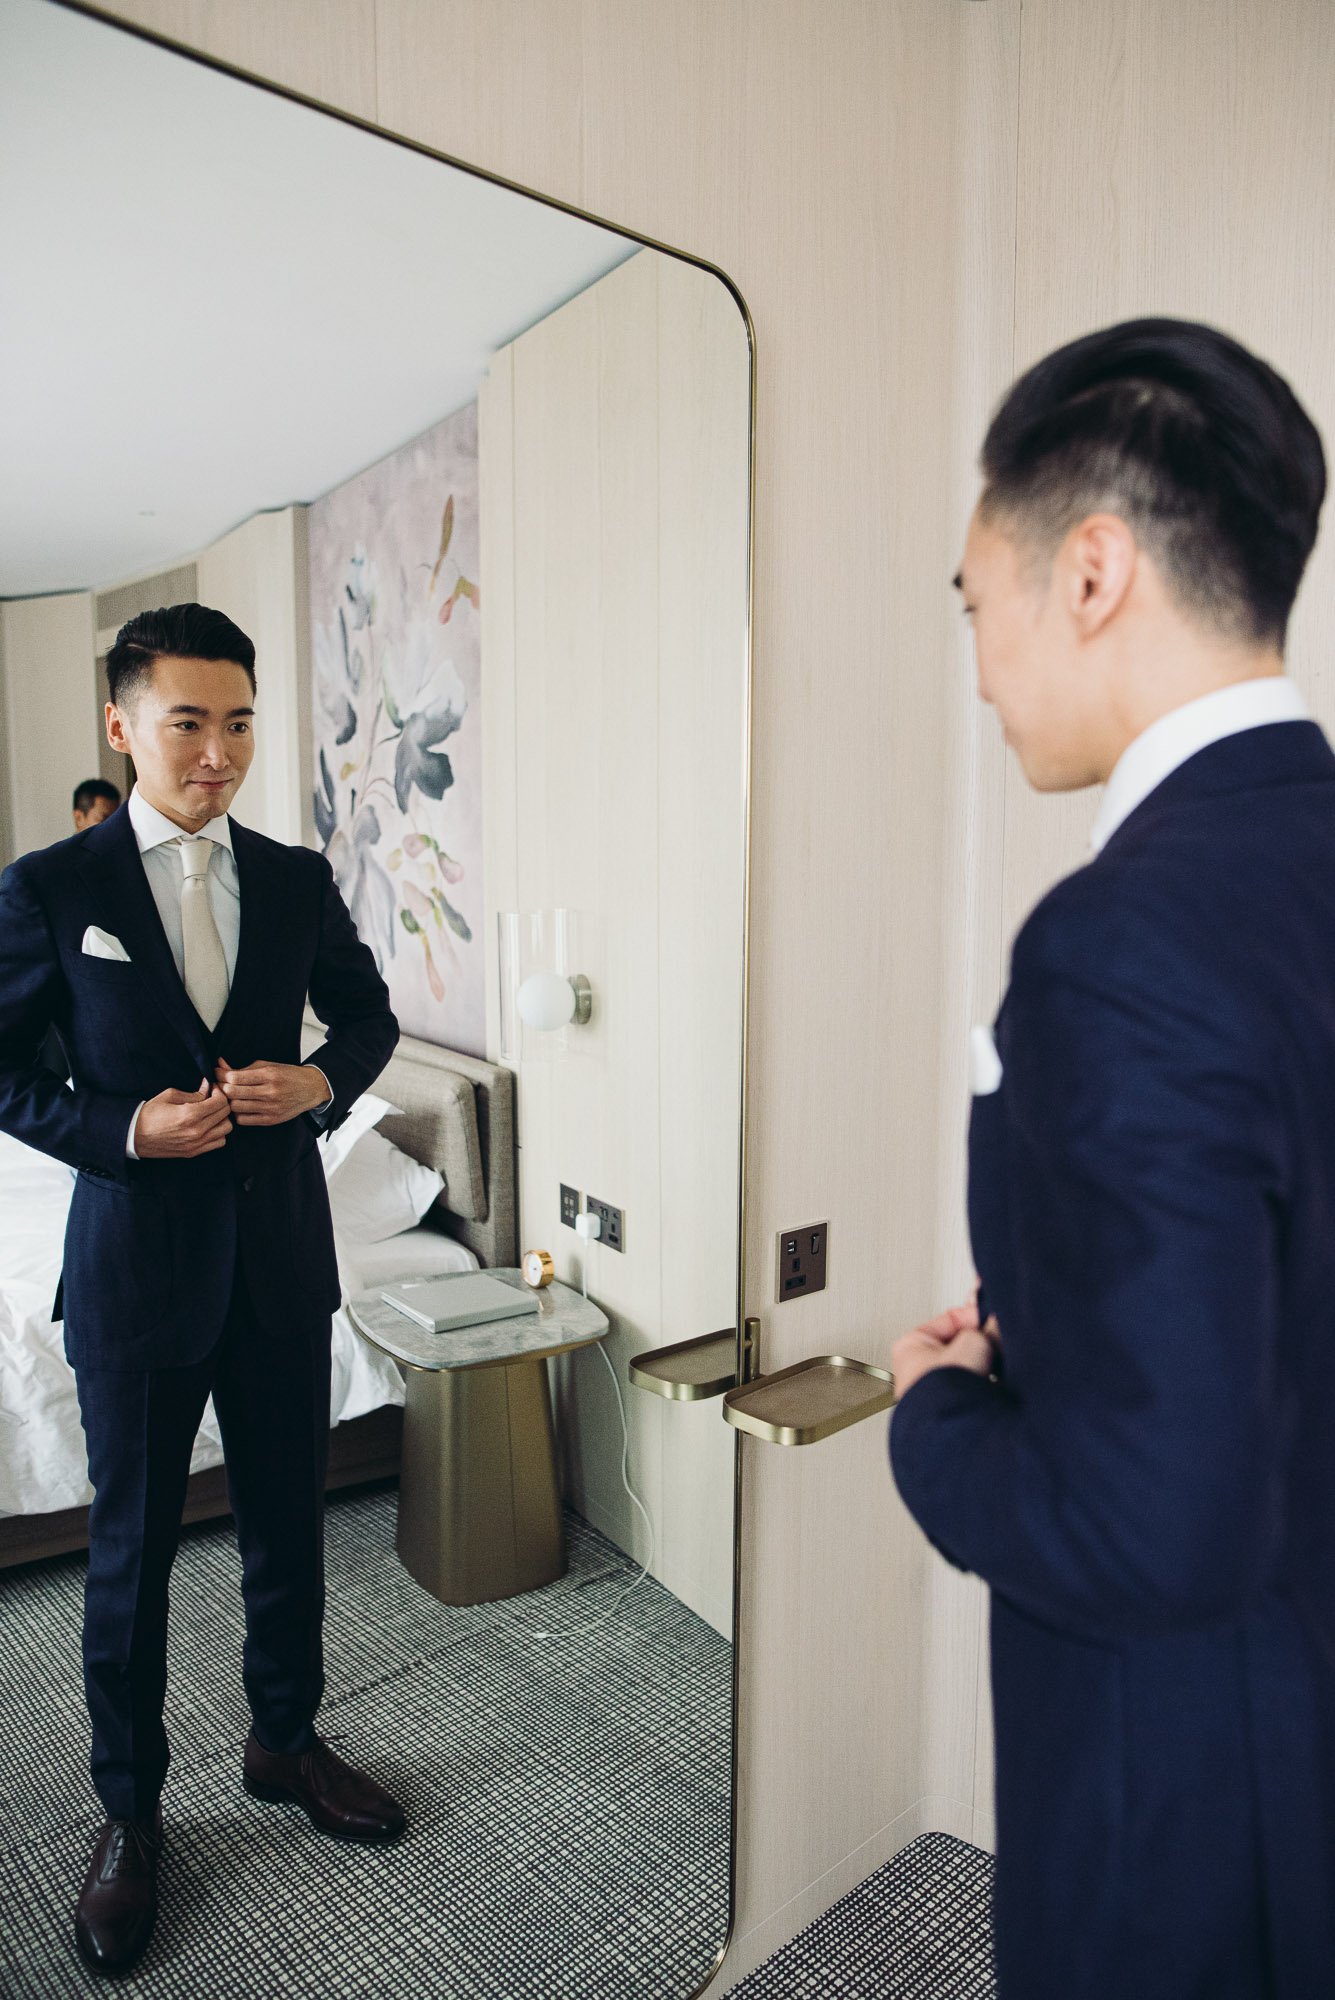 groom-getting-ready-for-big-day-in-hotel-room-documentary-wedding-photographer-brighton-hove-sussex.jpg